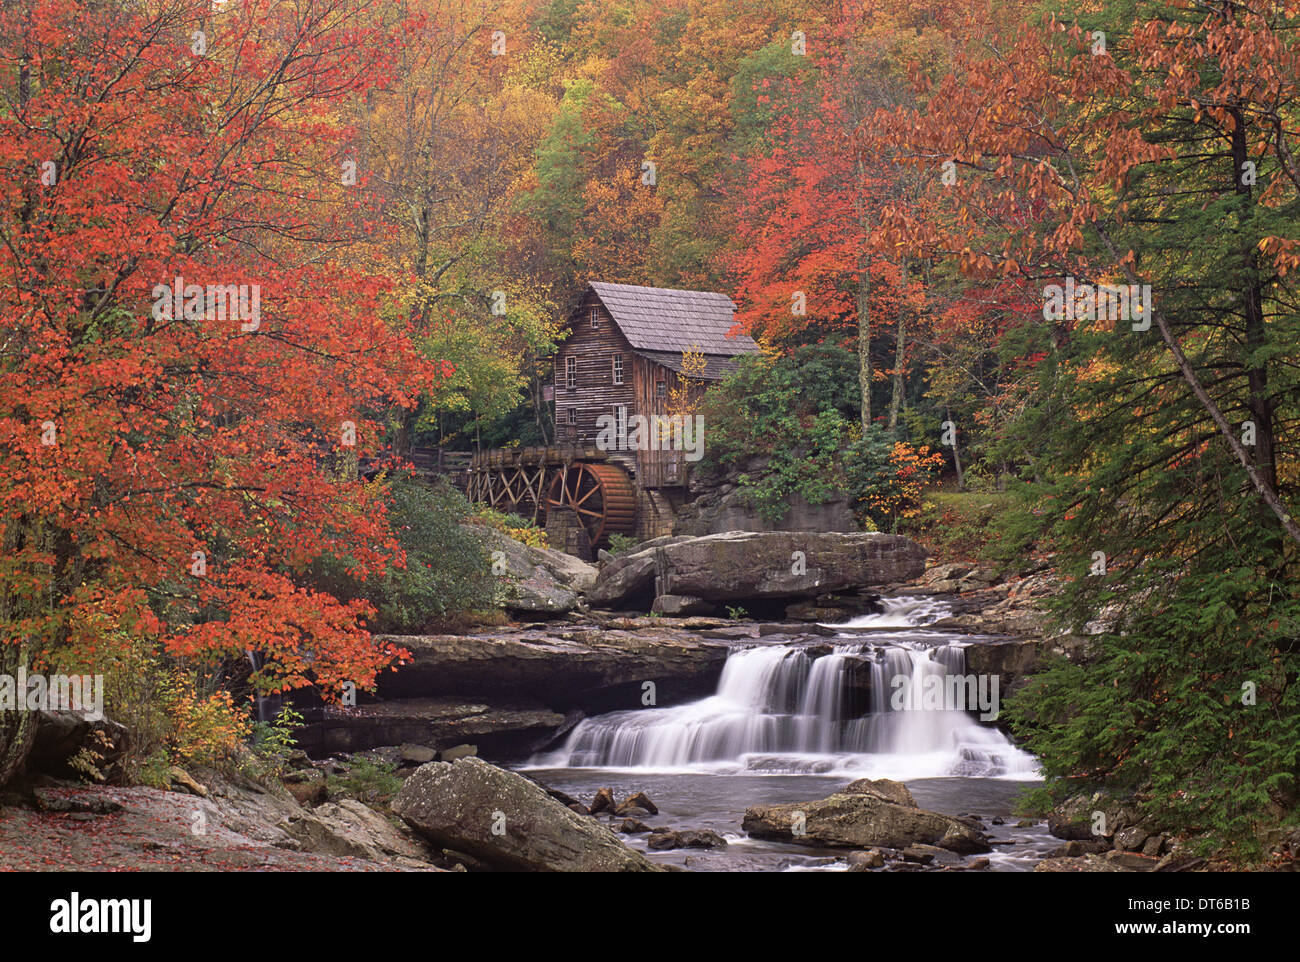 A historic grist mill building on the banks of Glade Creek in West Virginia. Stock Photo